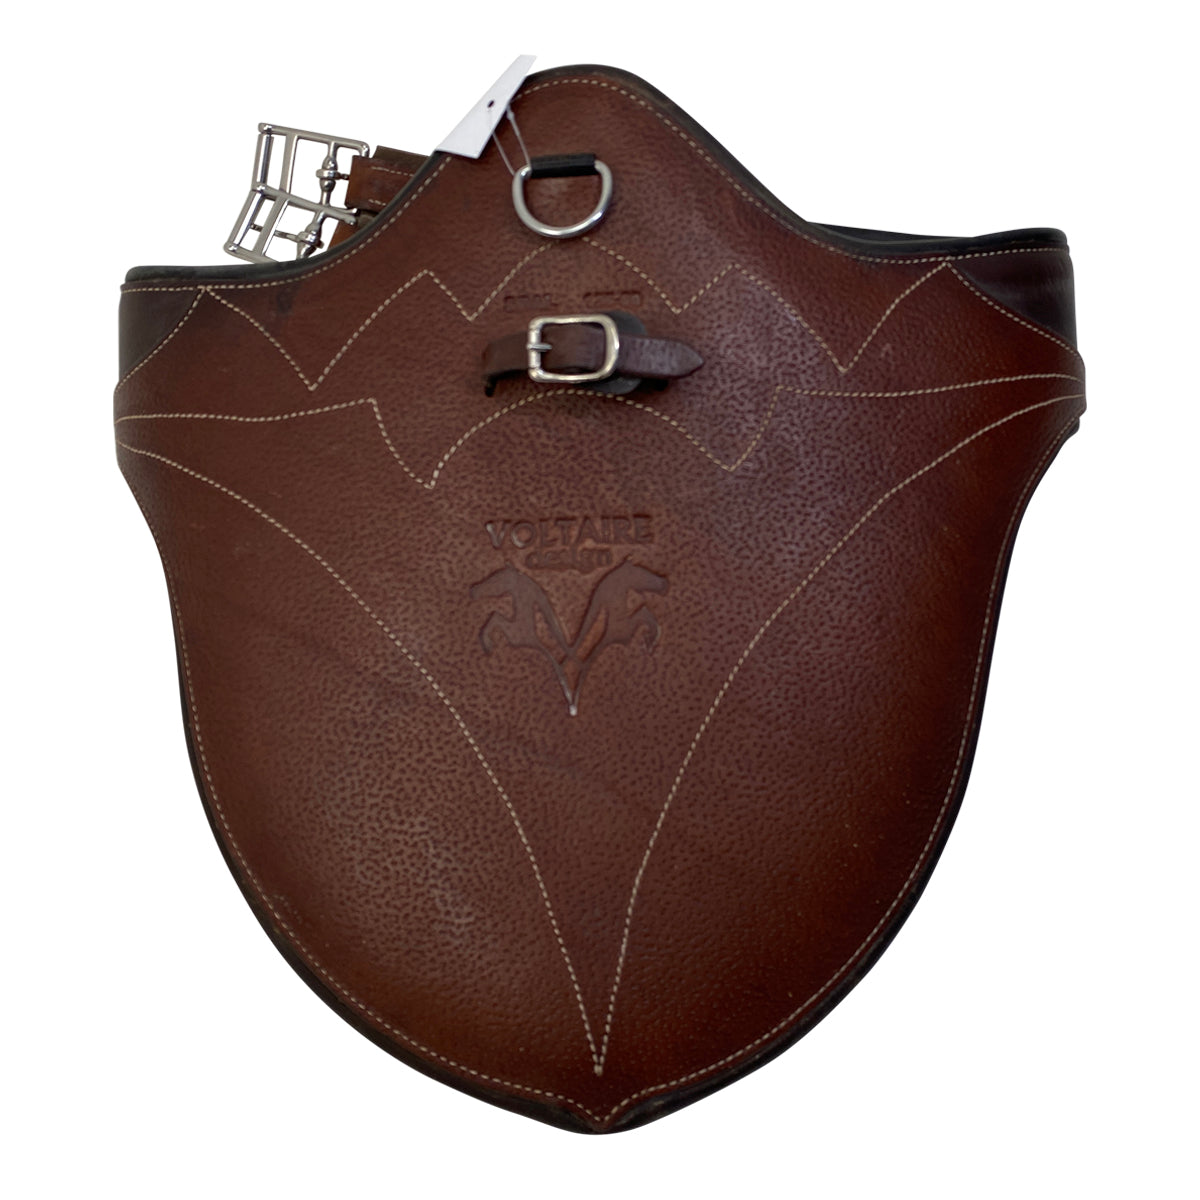 Voltaire Design Long Belly Guard Girth in Brown 